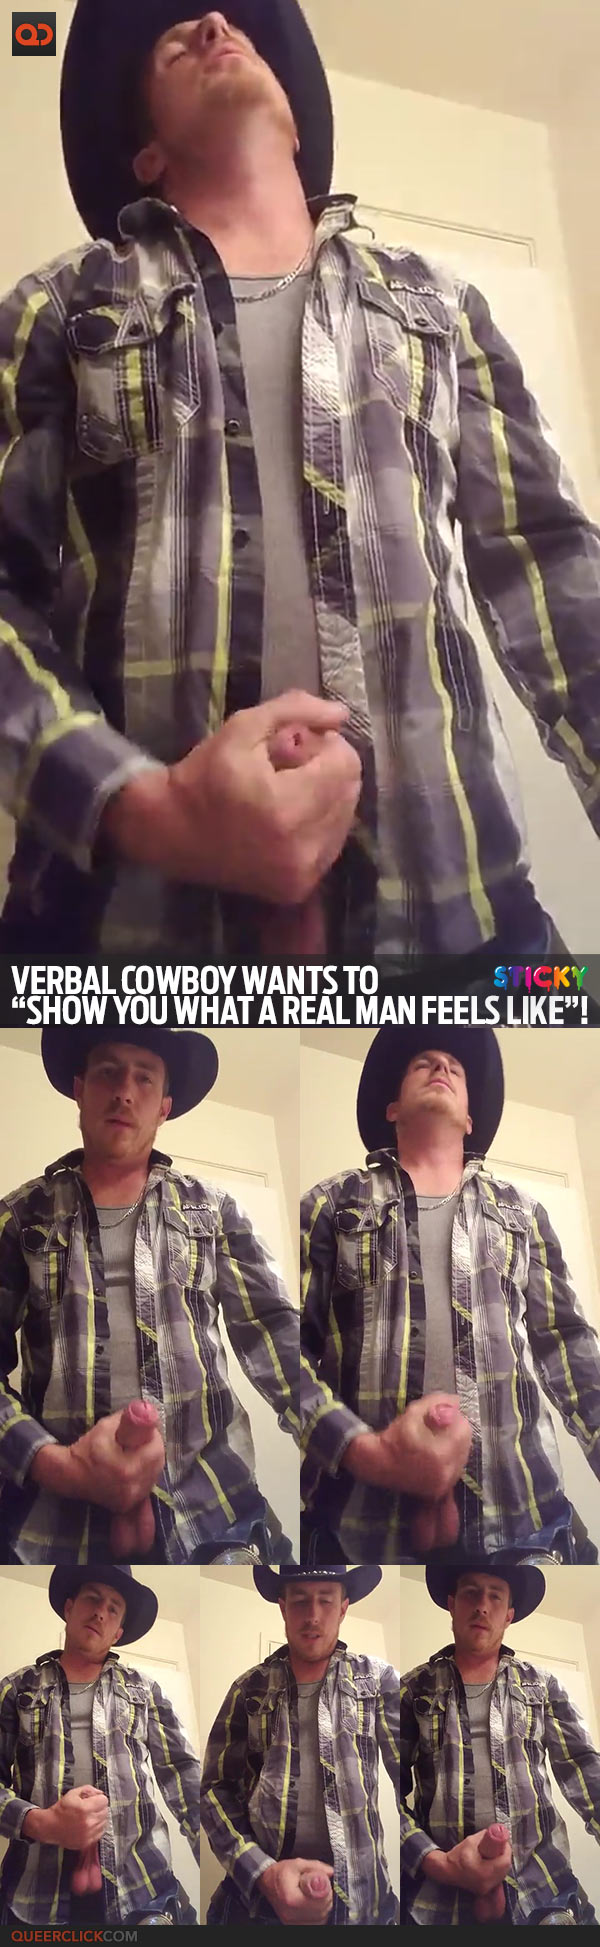 Verbal Cowboy Wants To “Show You What A Real Man Feels Like”!